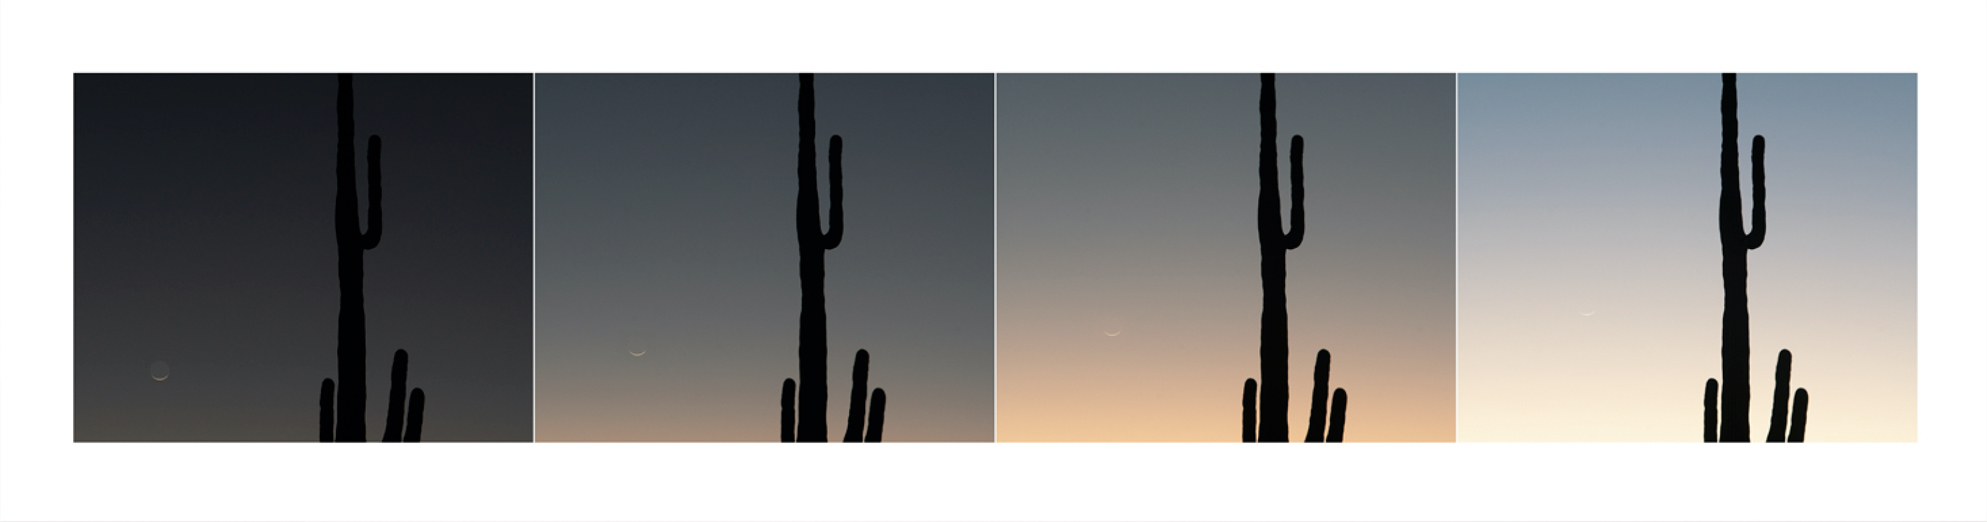 Richard Laugharn - The Sykes Crater Saguaro (CG03 220928), 2022, archival pigment print, 16" x 58.5"